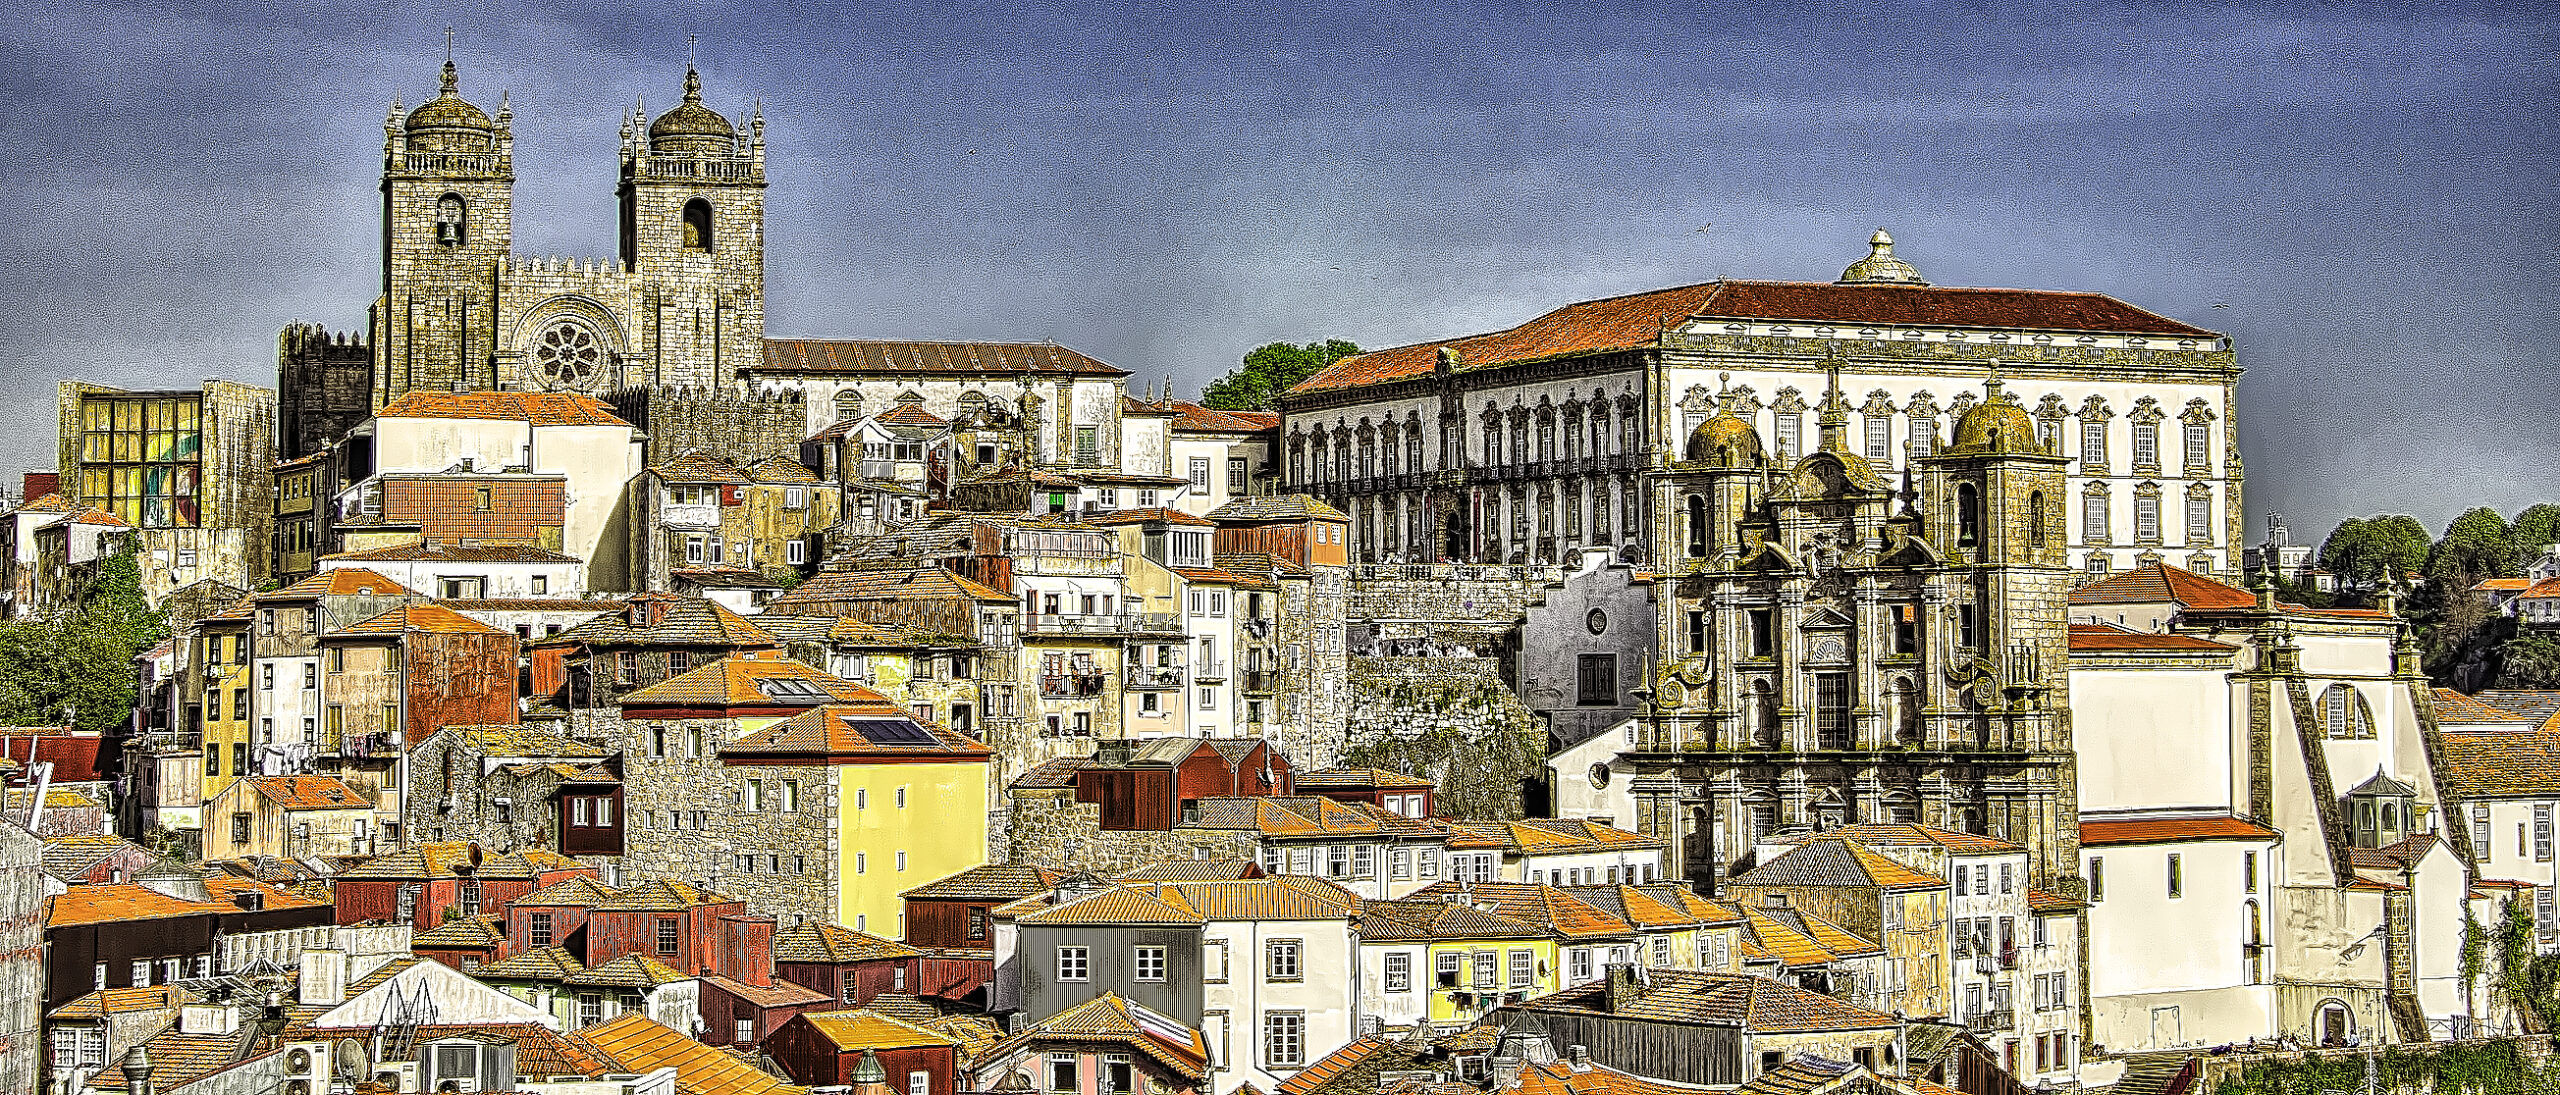 A view of two cathedrals over the city rooftops in Porto, Portugal